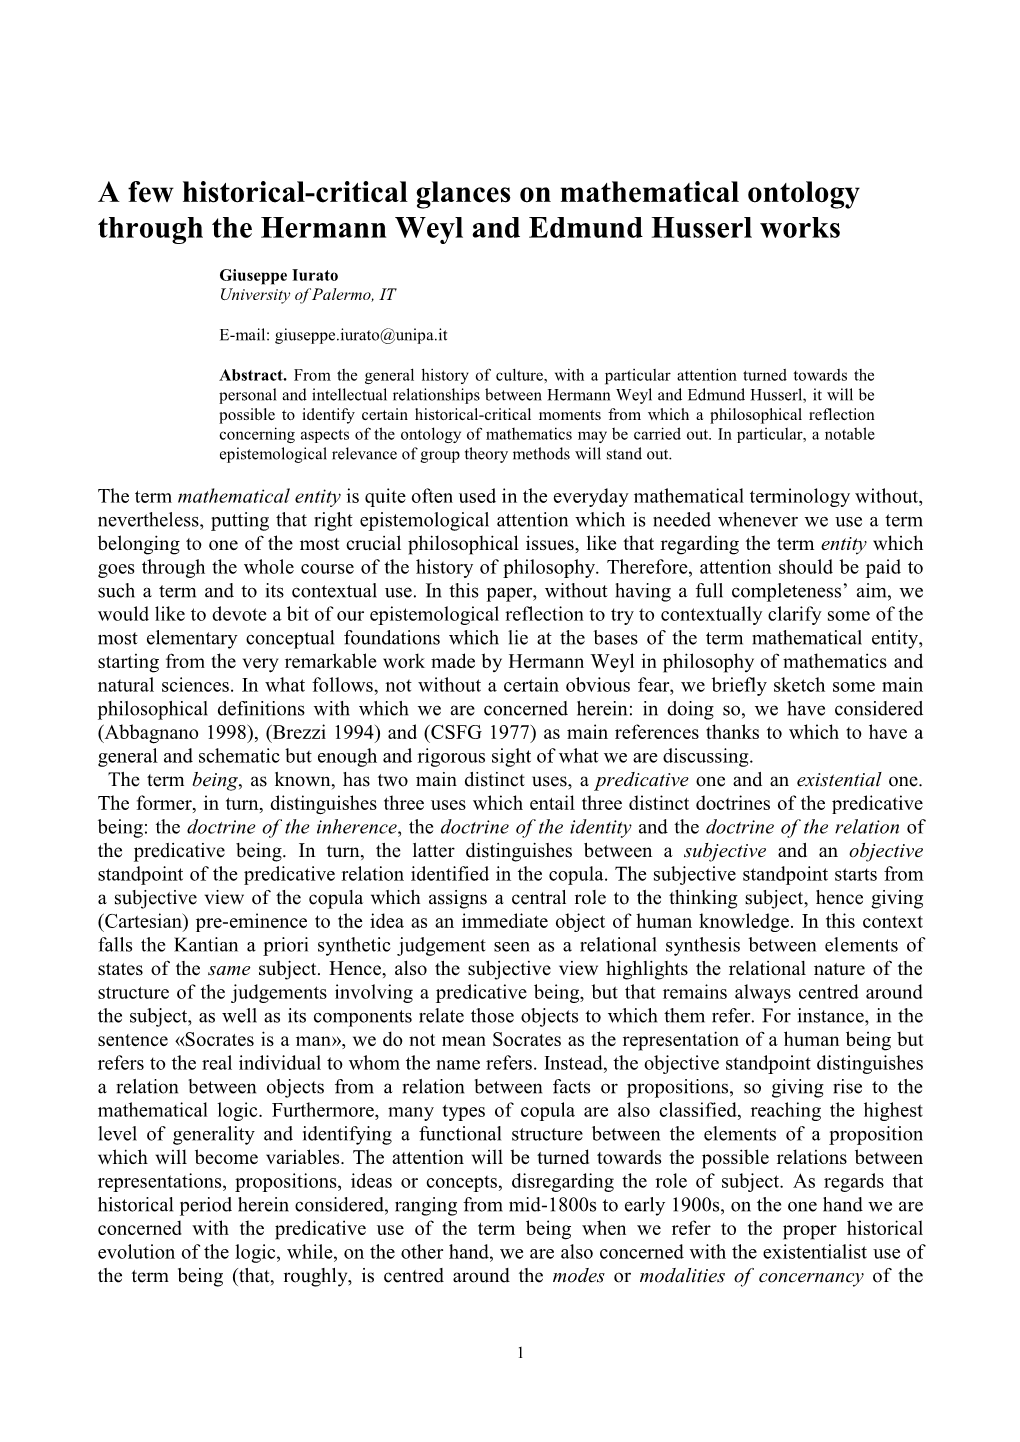 A Few Historical-Critical Glances on Mathematical Ontology Through the Hermann Weyl and Edmund Husserl Works